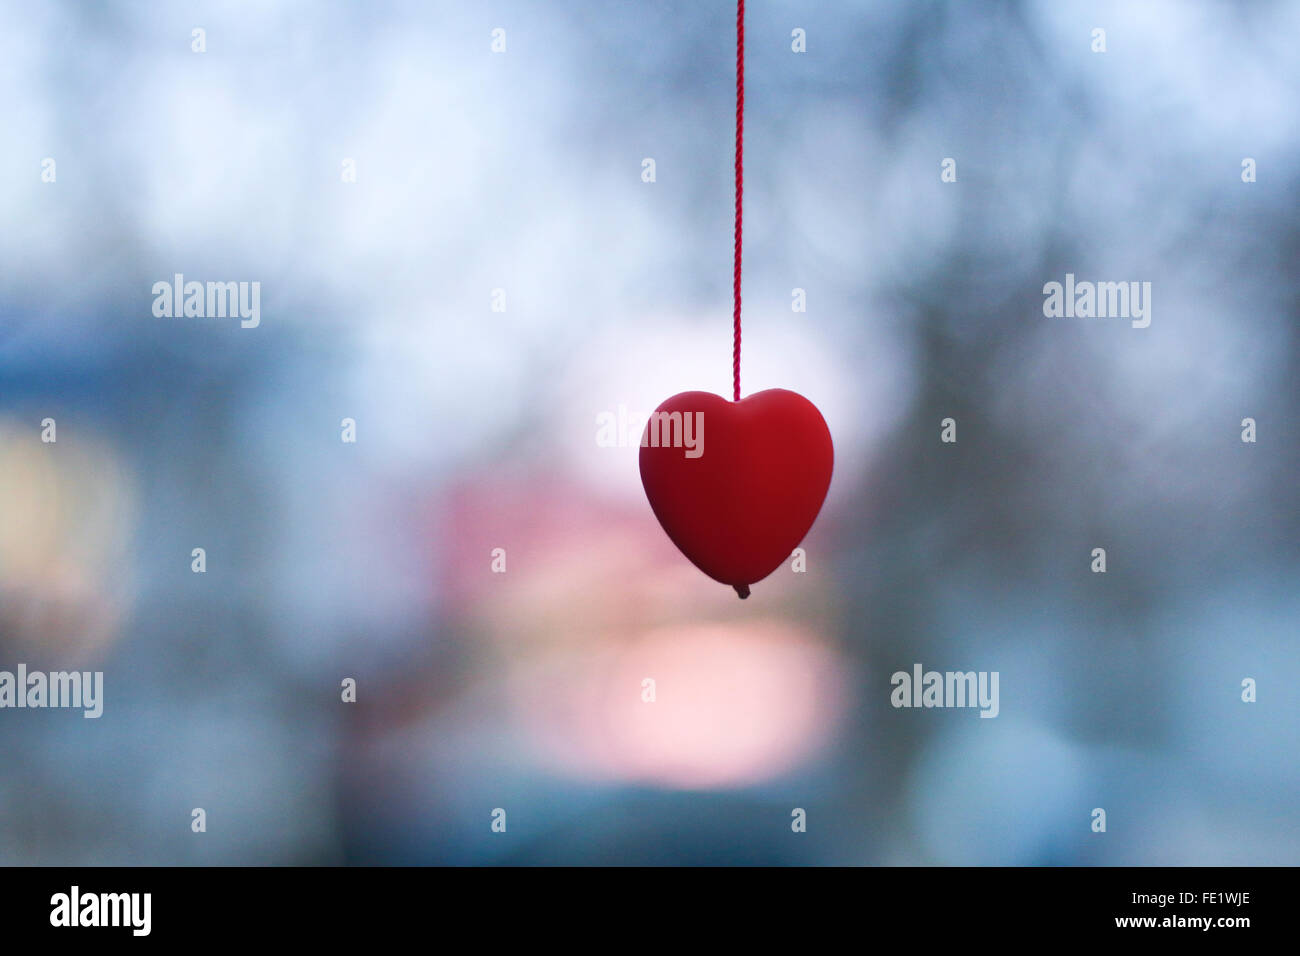 valentine holiday greeting card with red heart on blurred background Stock Photo